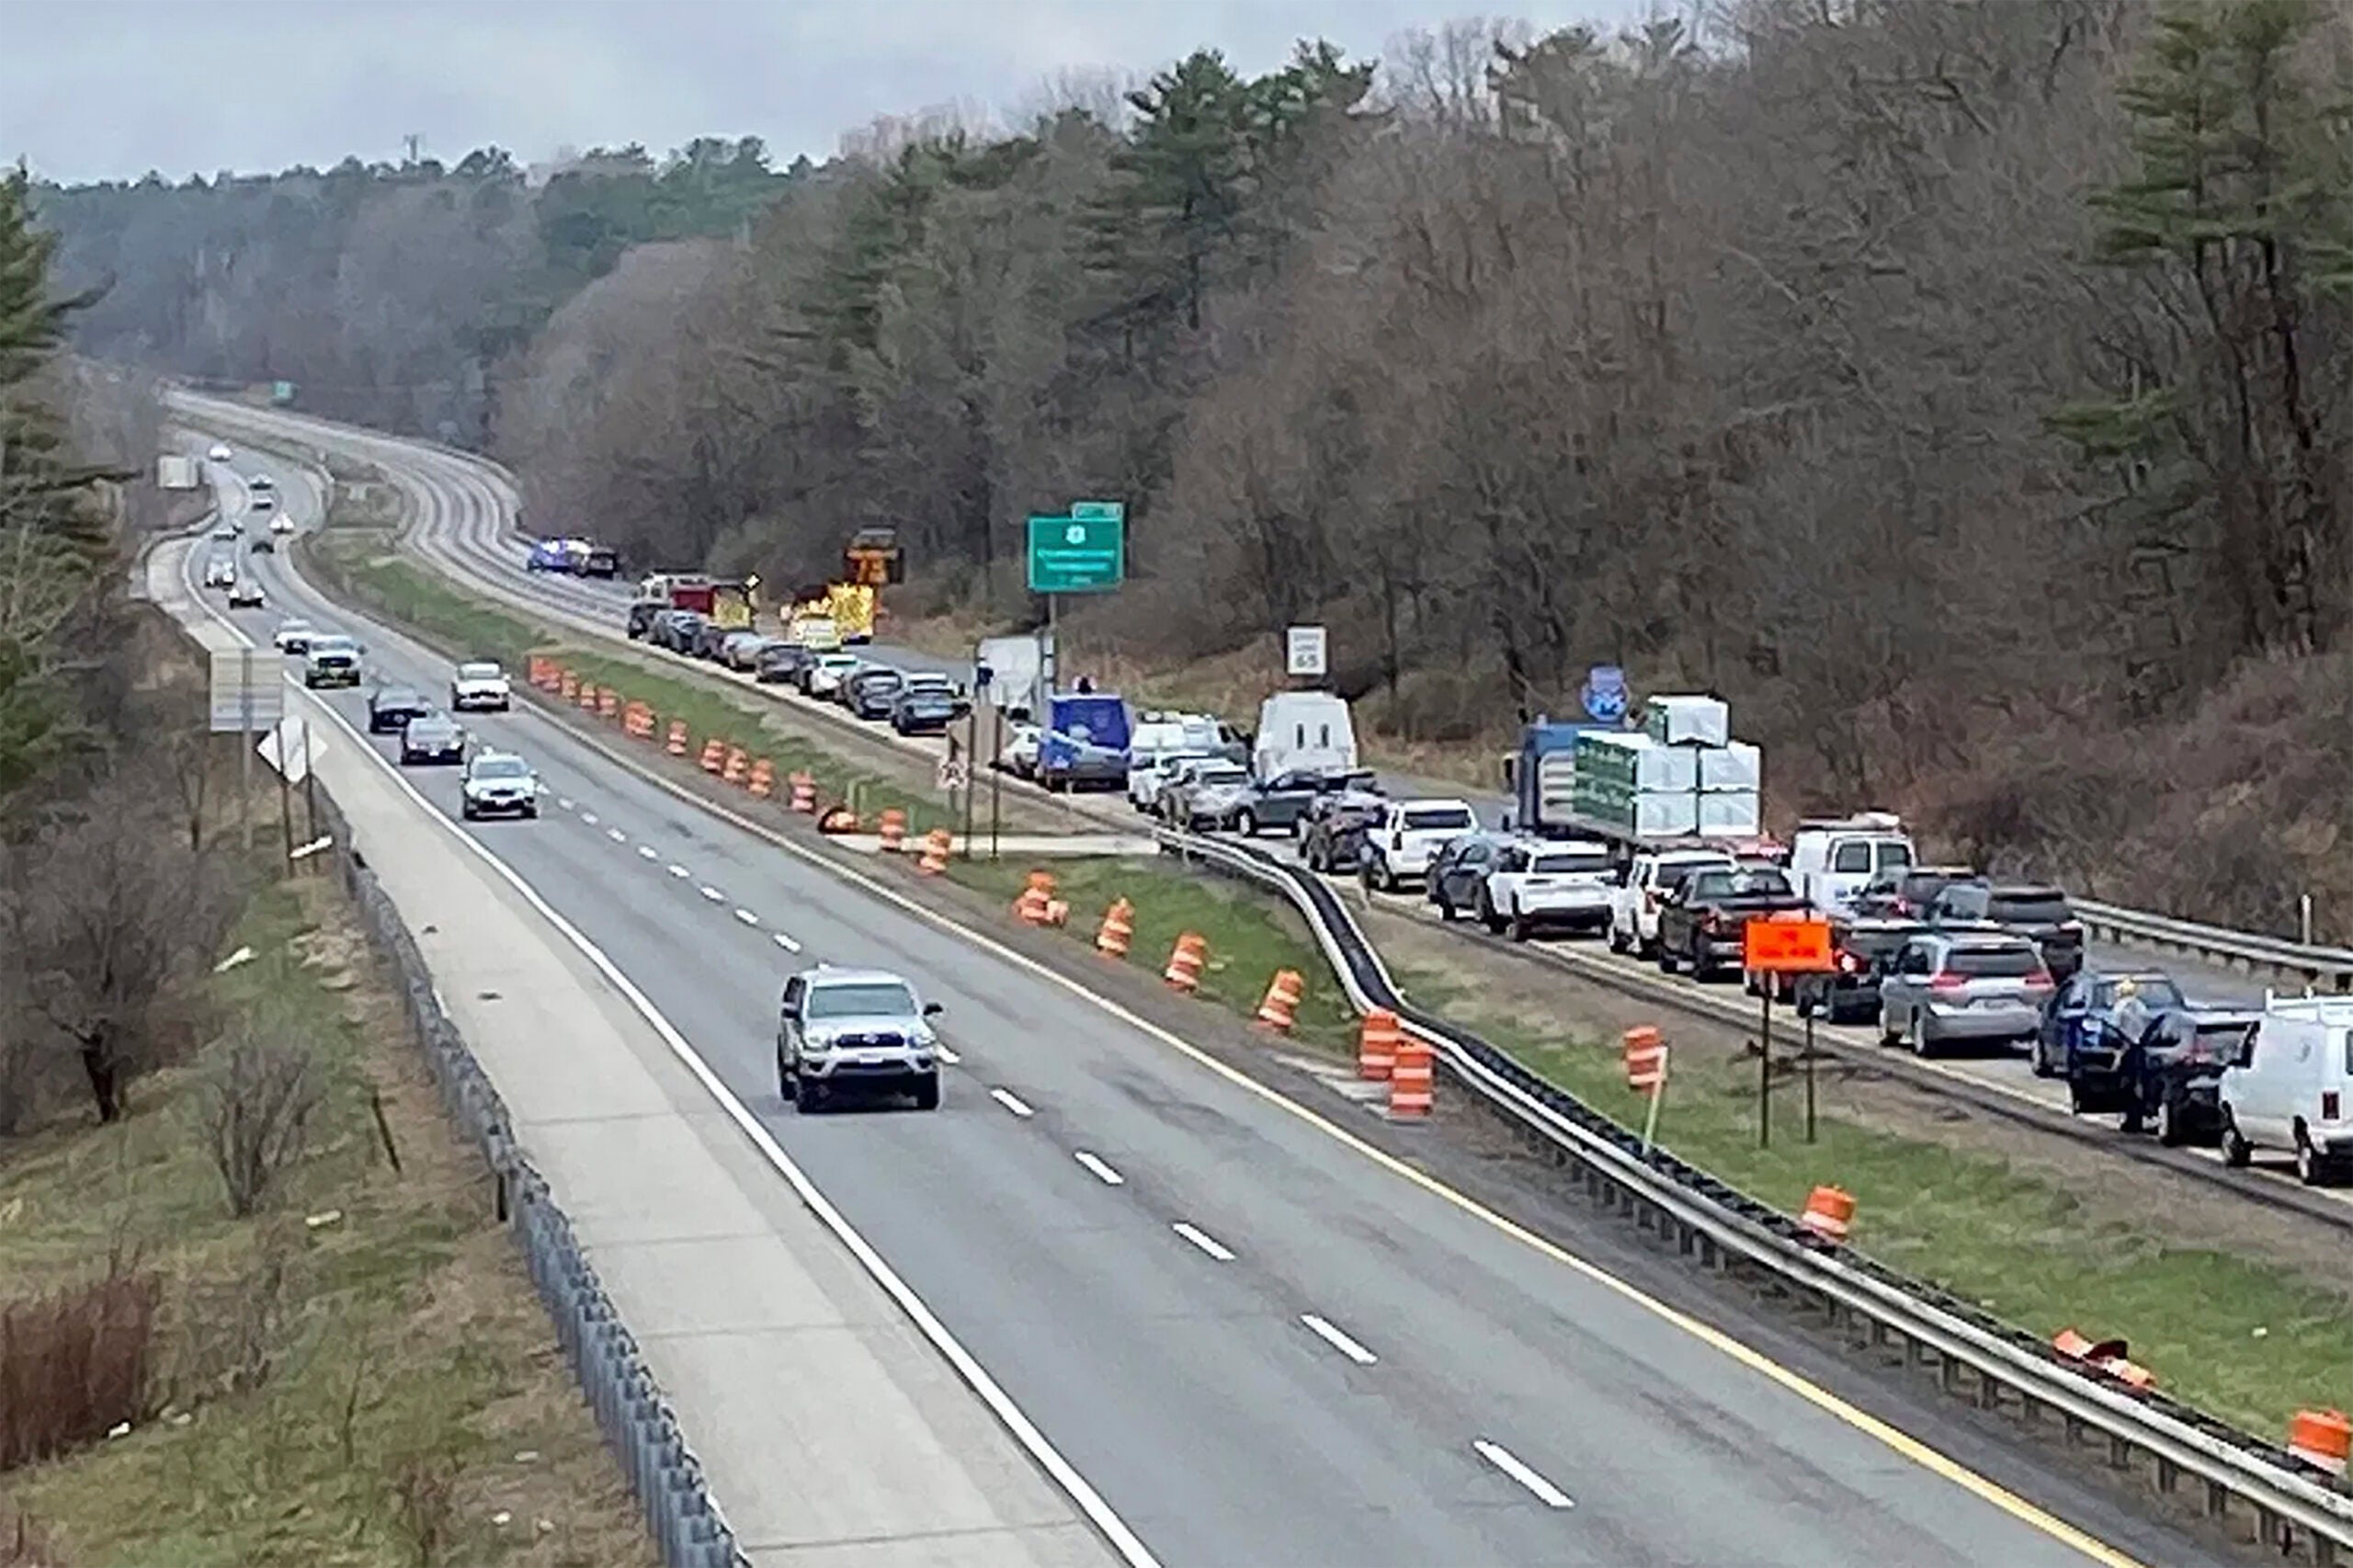 Traffic is backed up near the scene where people were injured in a shooting on Interstate 295, in Yarmouth, Maine, on Tuesday.